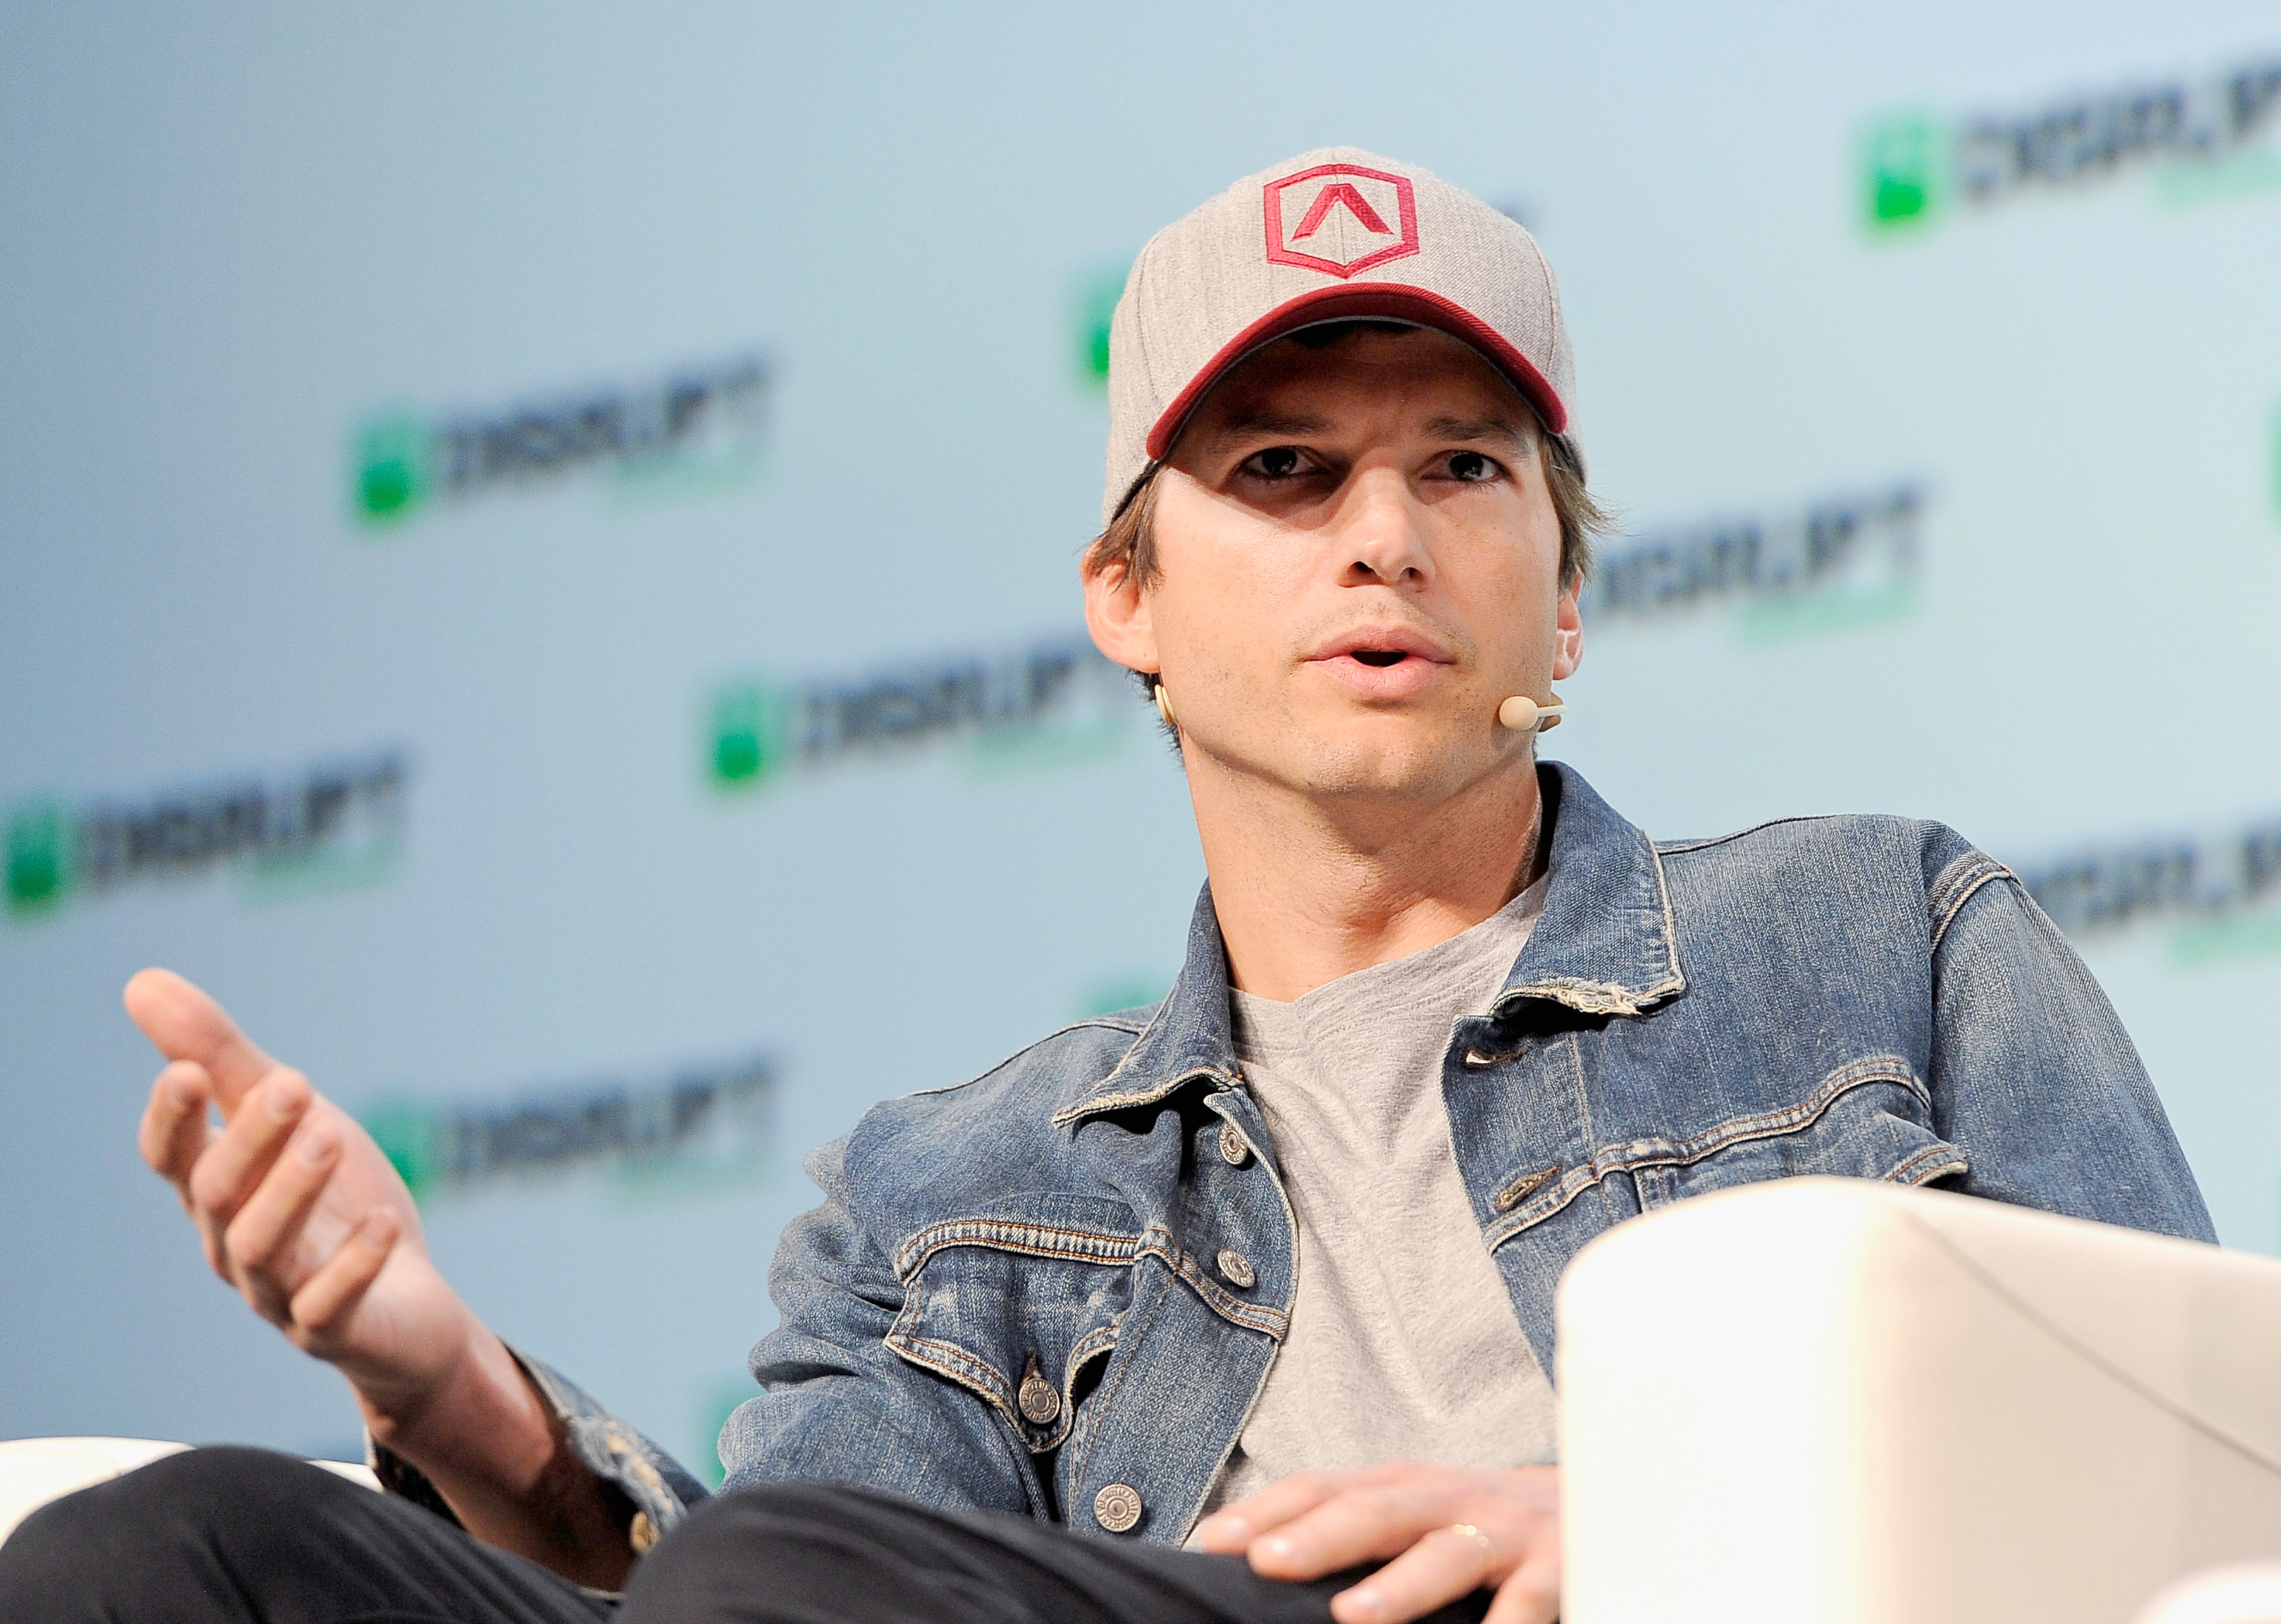 Ashton Kutcher's New Reality Show Wants to Help You Pay off Debt. But Is the Advice any Good?